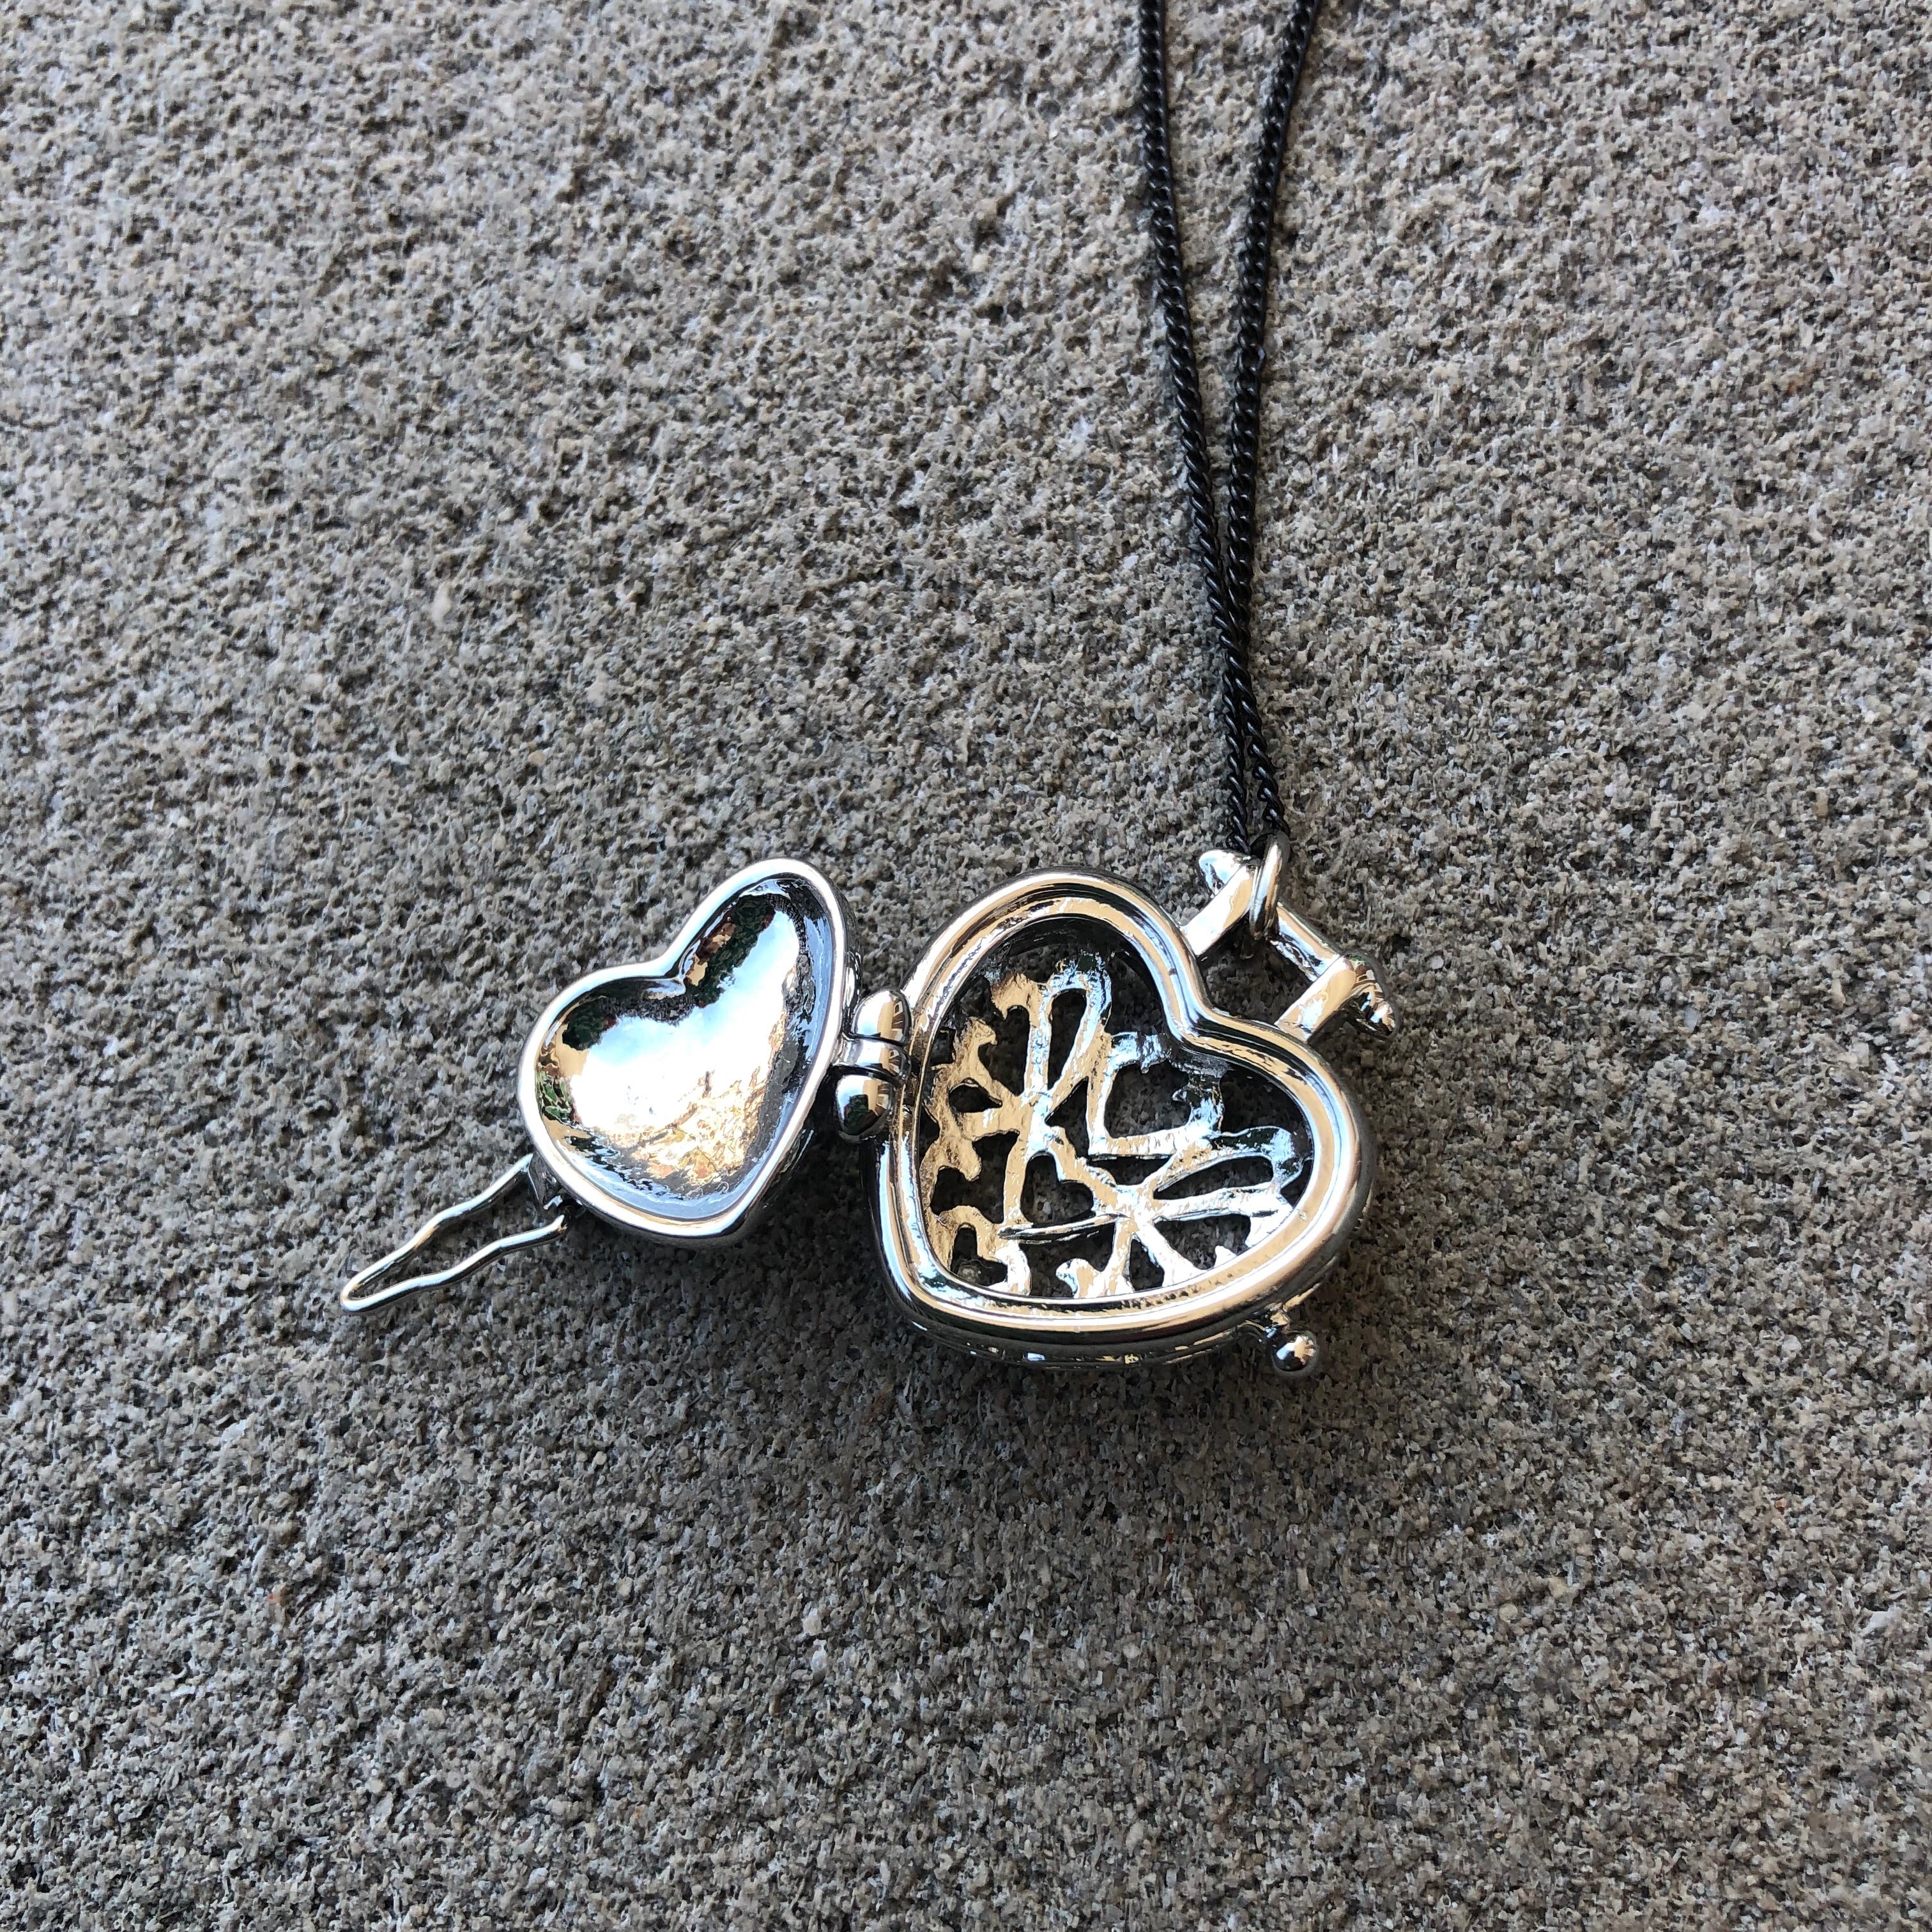 Silvery Aromatherapy Essential Oils Diffuser Heart Locket Pendant Necklace